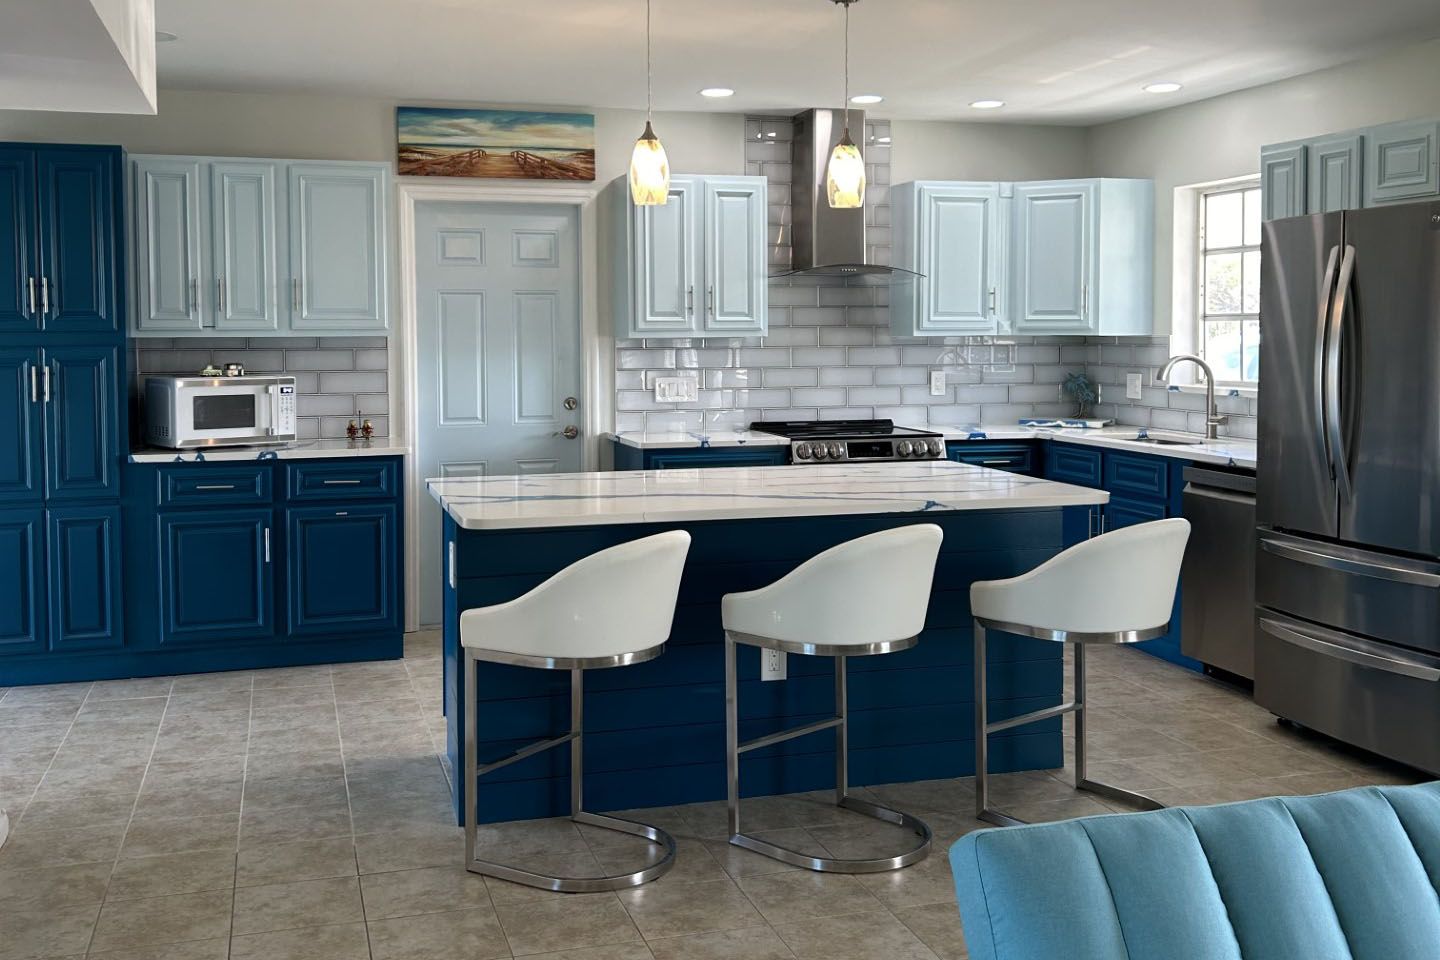 A kitchen with blue cabinets and white stools and a blue couch.